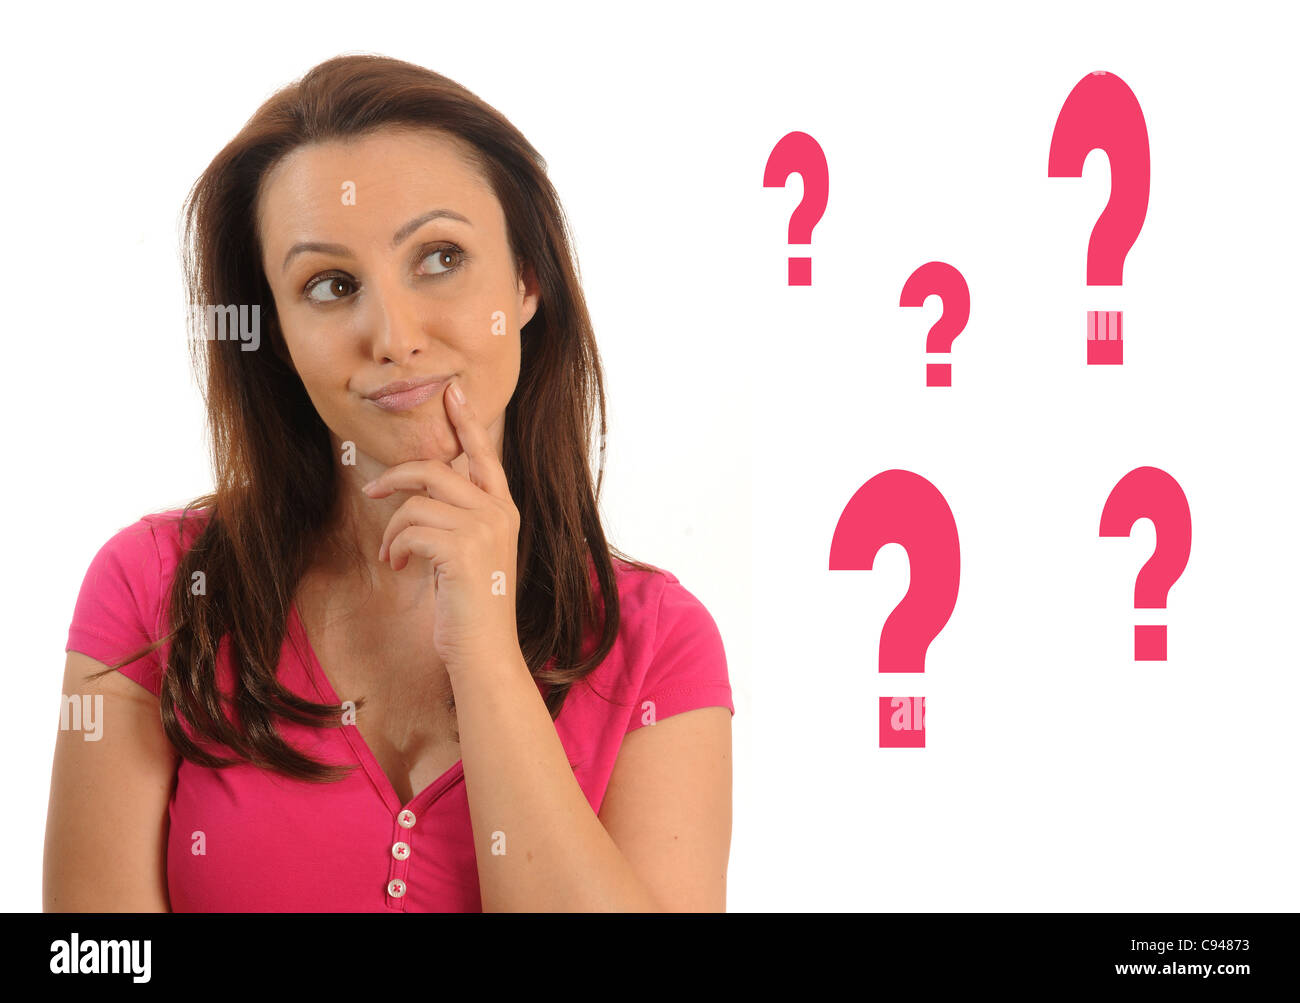 Thoughtful woman looking at some question marks. Stock Photo